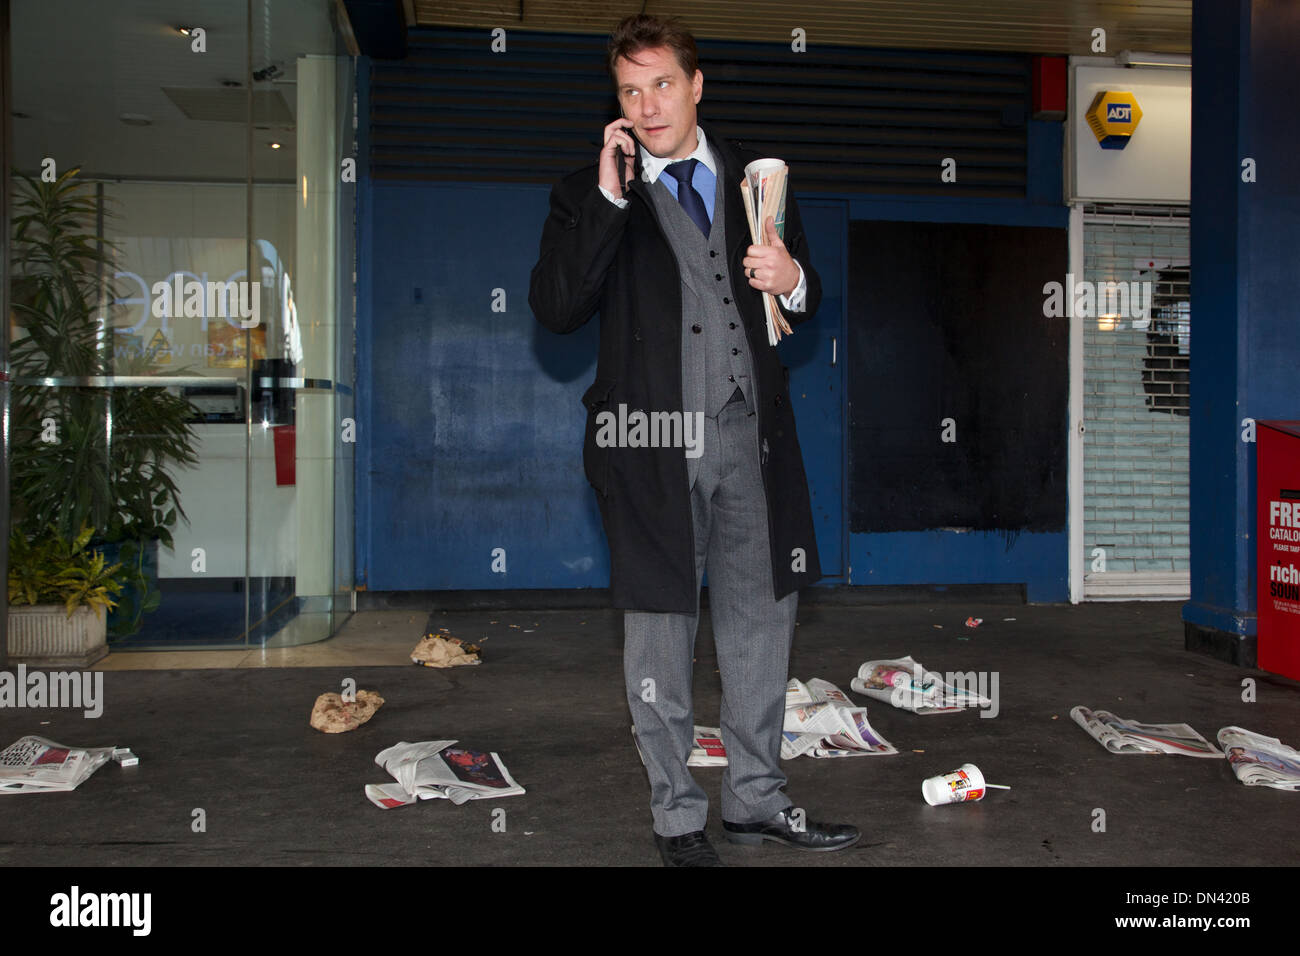 A smirking City of London businessman speaking on his mobile phone surrounded by rubbish Stock Photo